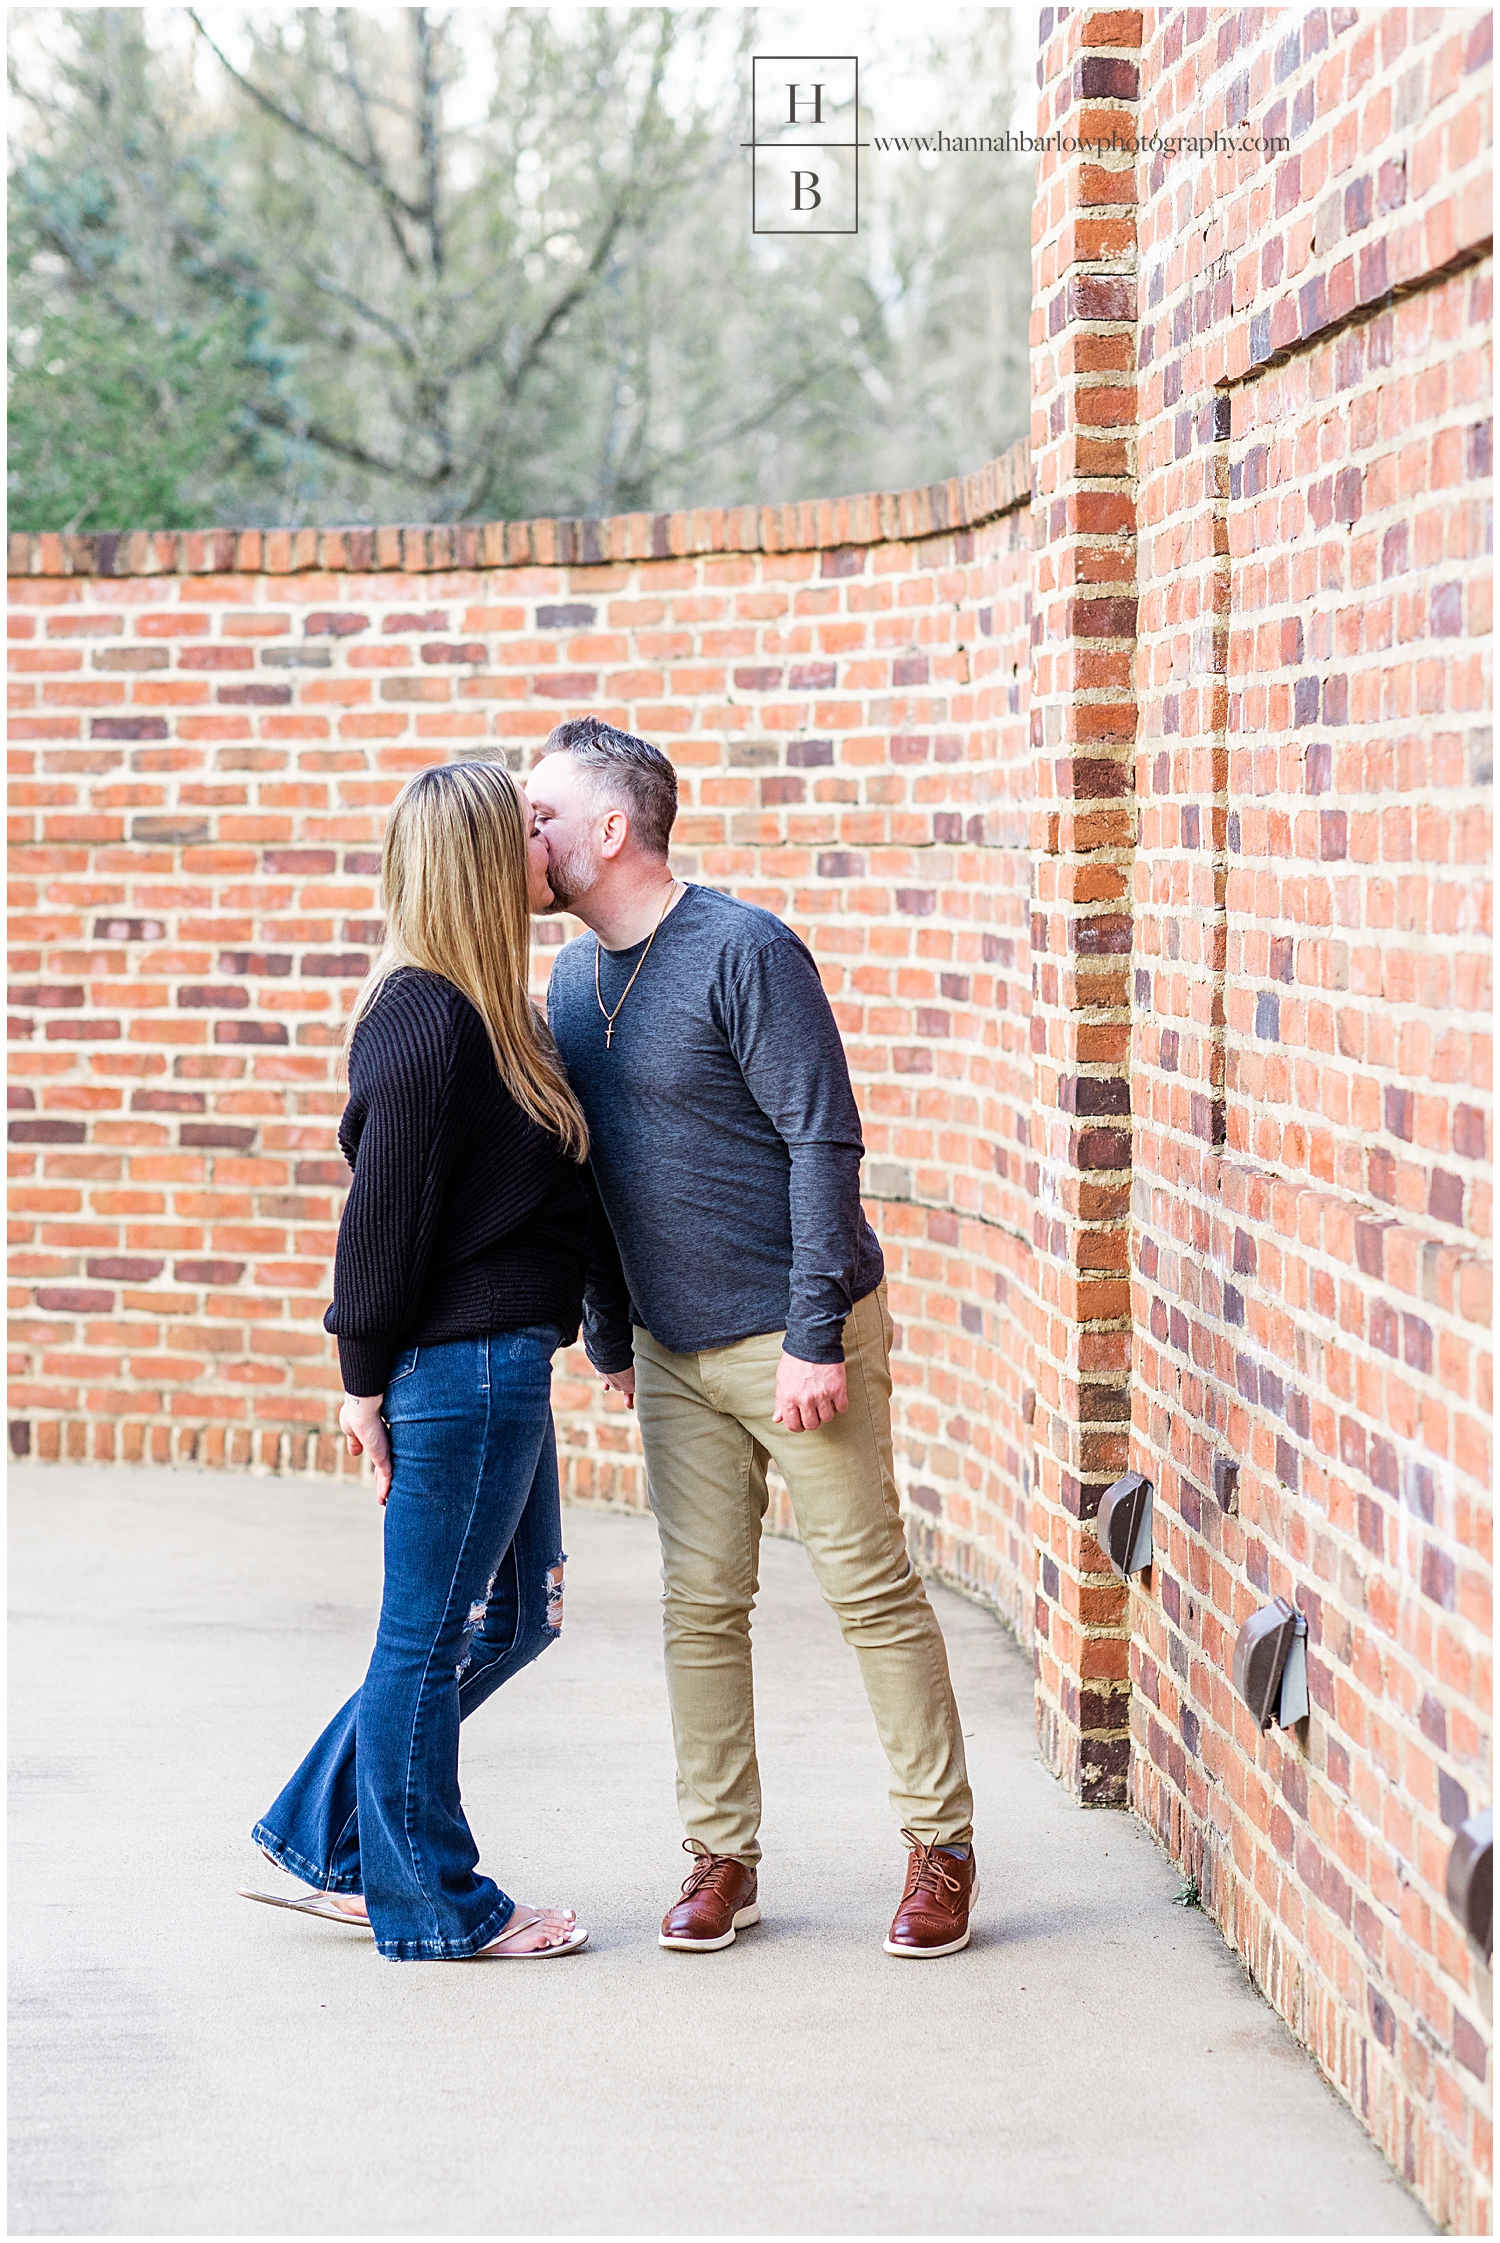 Couple stops walking to kiss by brick wall.